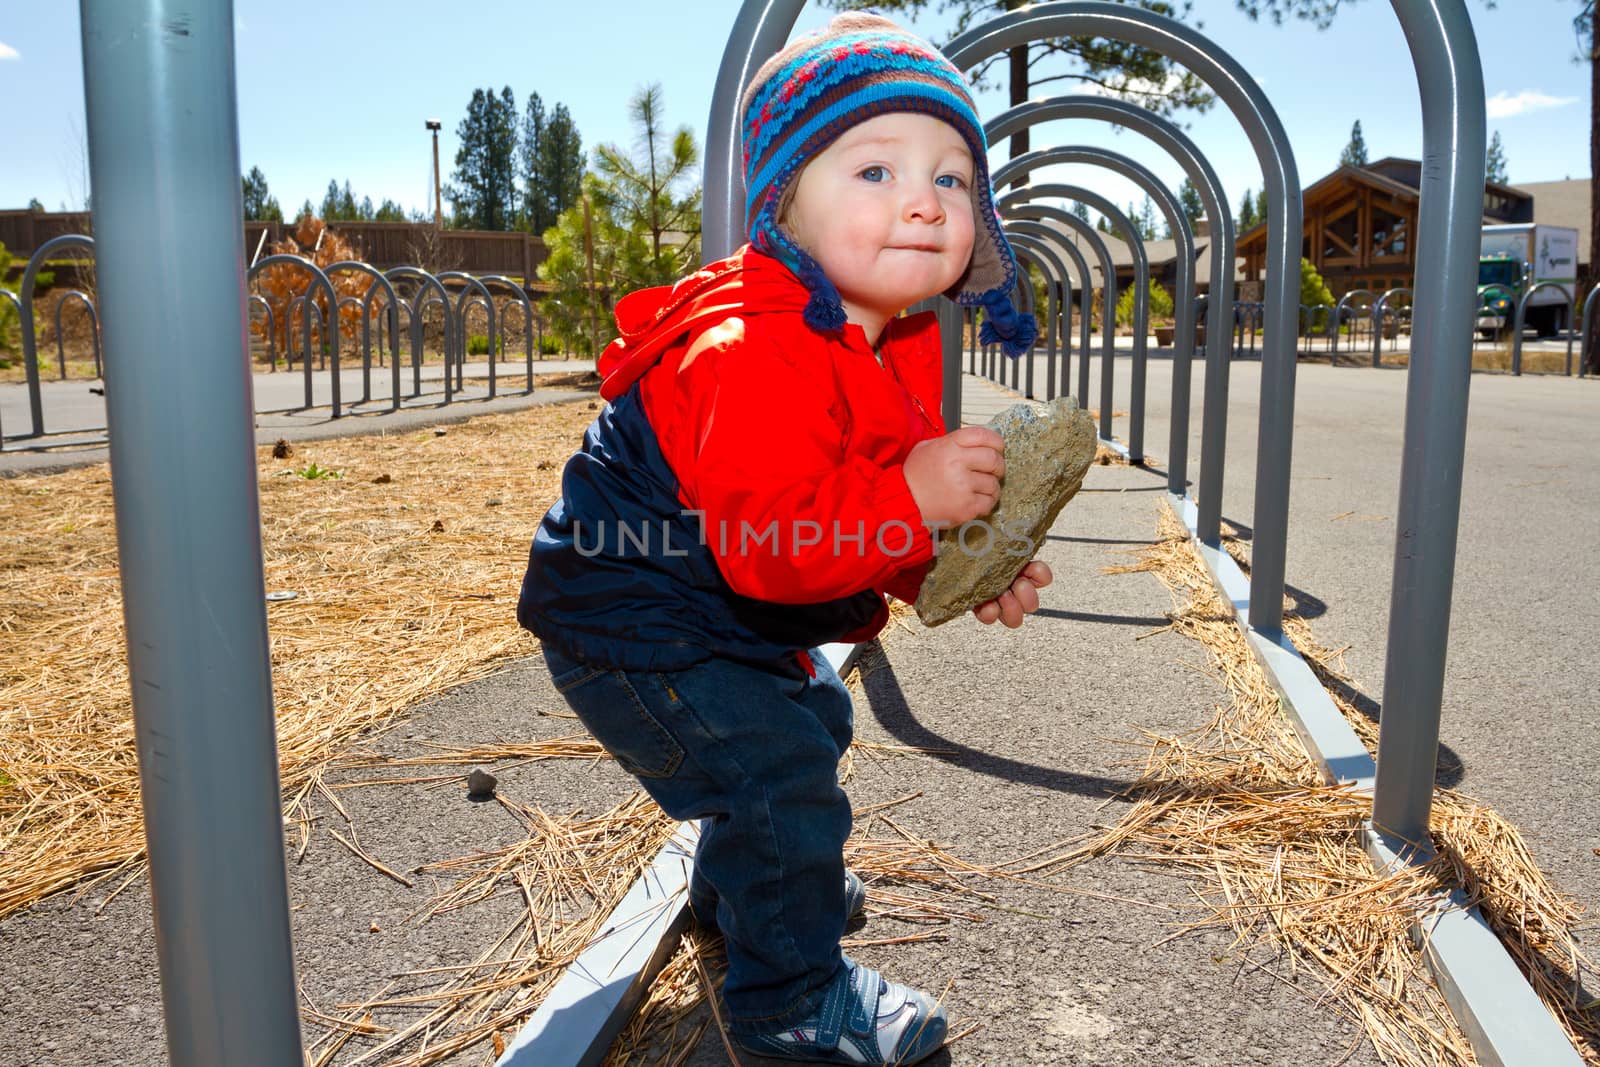 One Year Old Playing at Park by joshuaraineyphotography